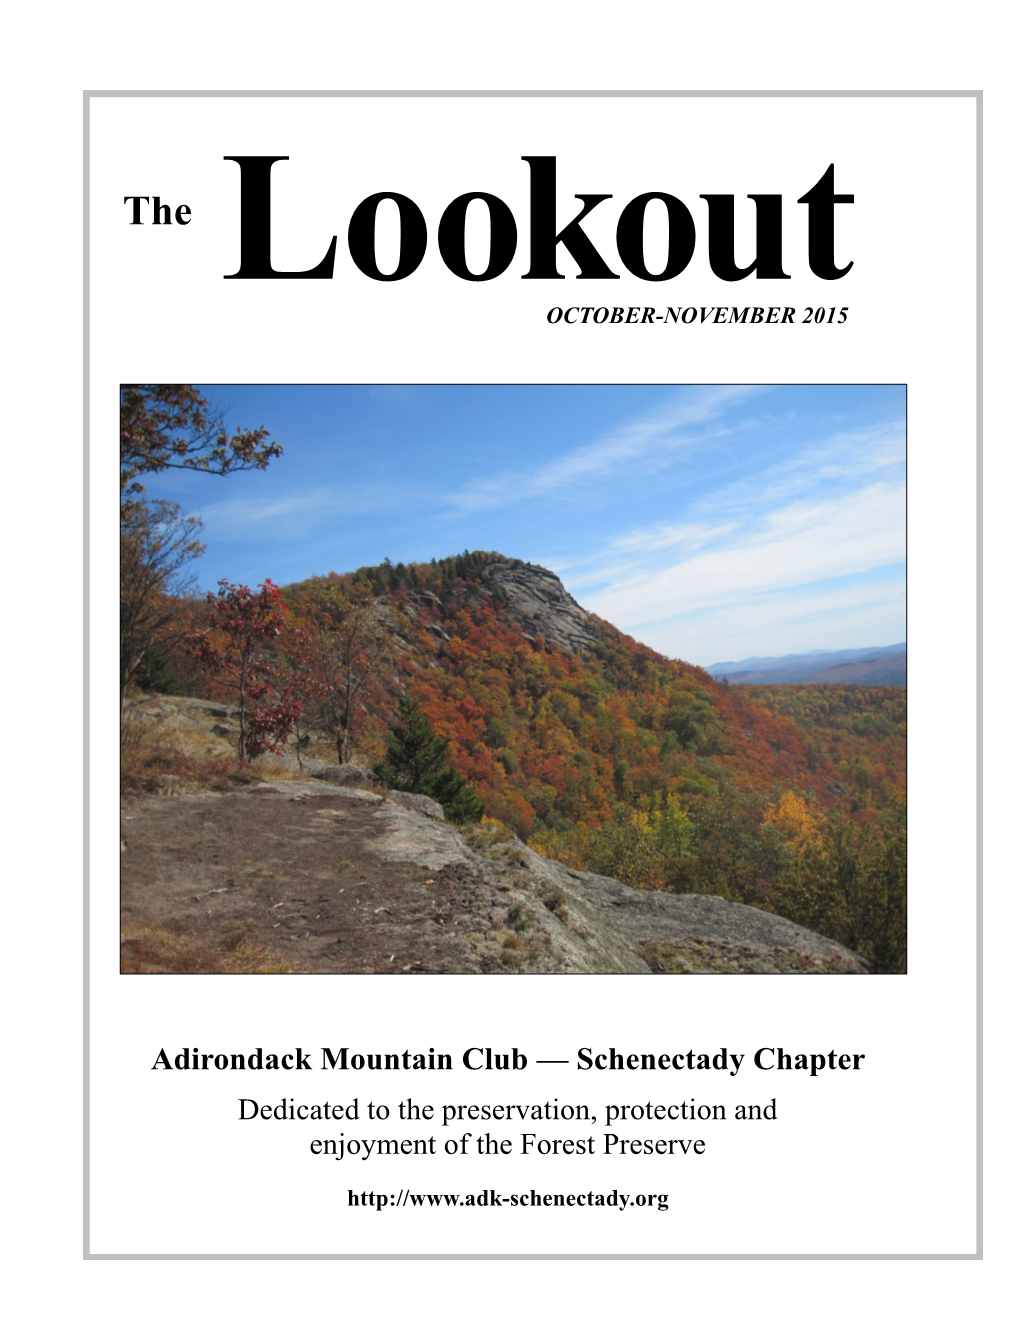 The Lookout 2015-1011